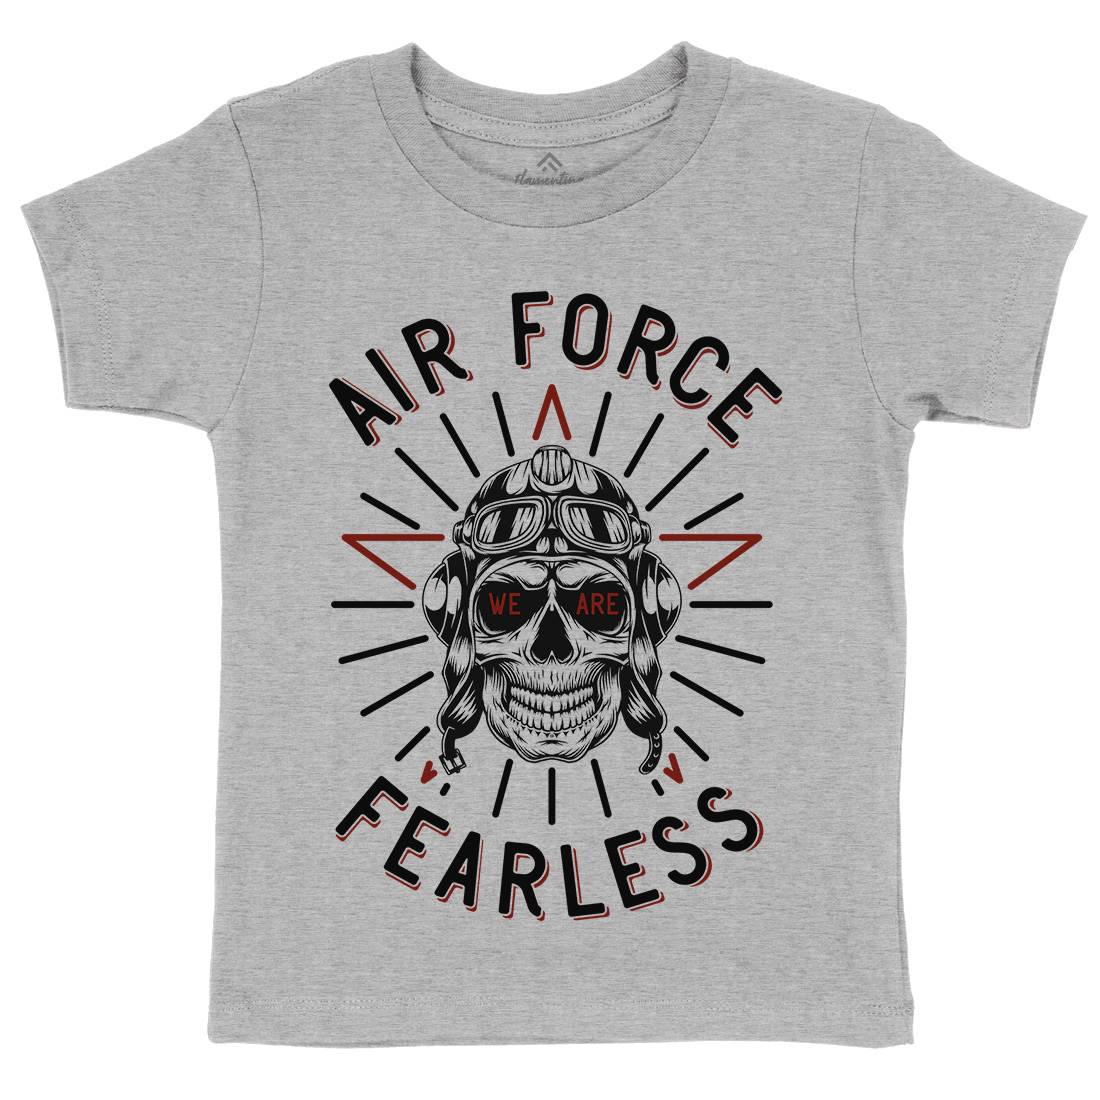 Air Force Fearless Kids Crew Neck T-Shirt Army D900